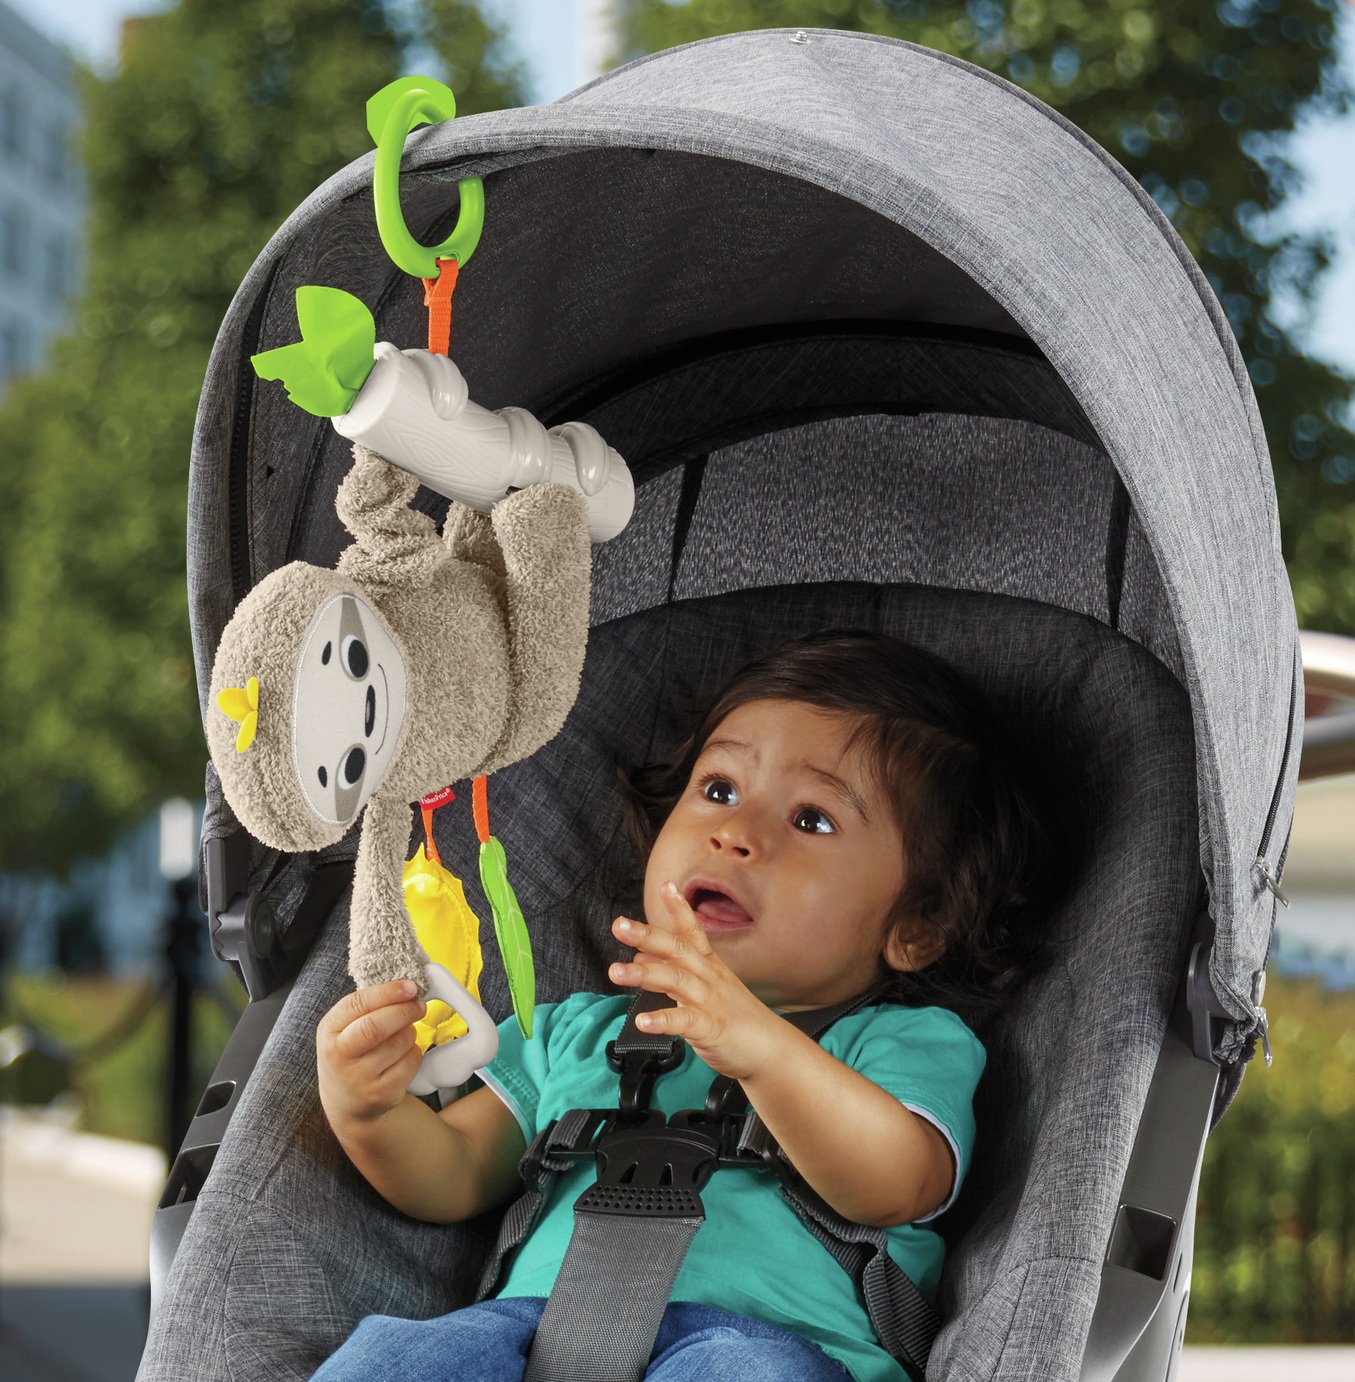 Fisher-Price So Much Fun Stroller Sloth Review